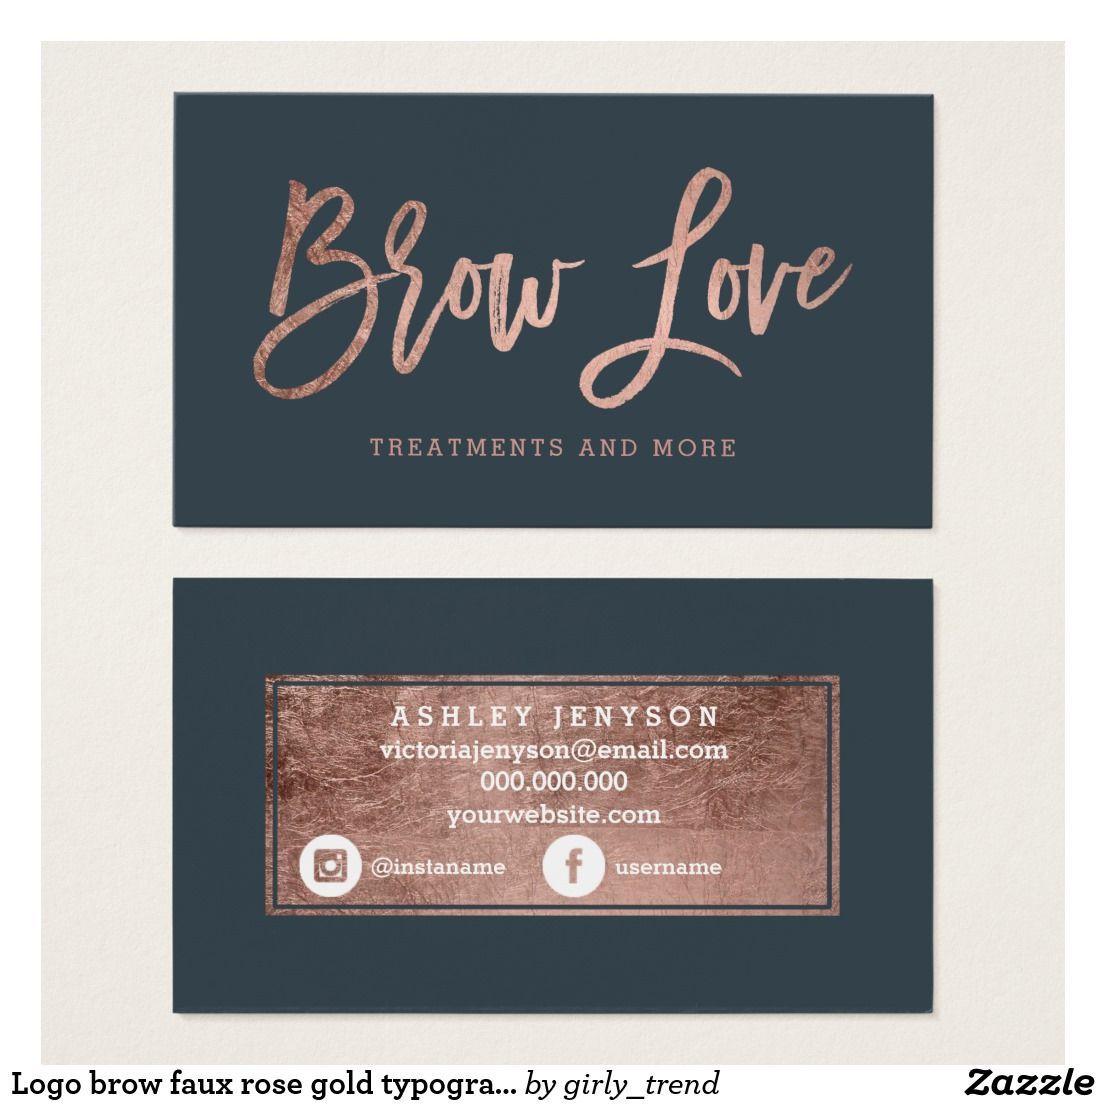 Charcoal and Gold Logo - Logo brow faux rose gold typography grey charcoal business card